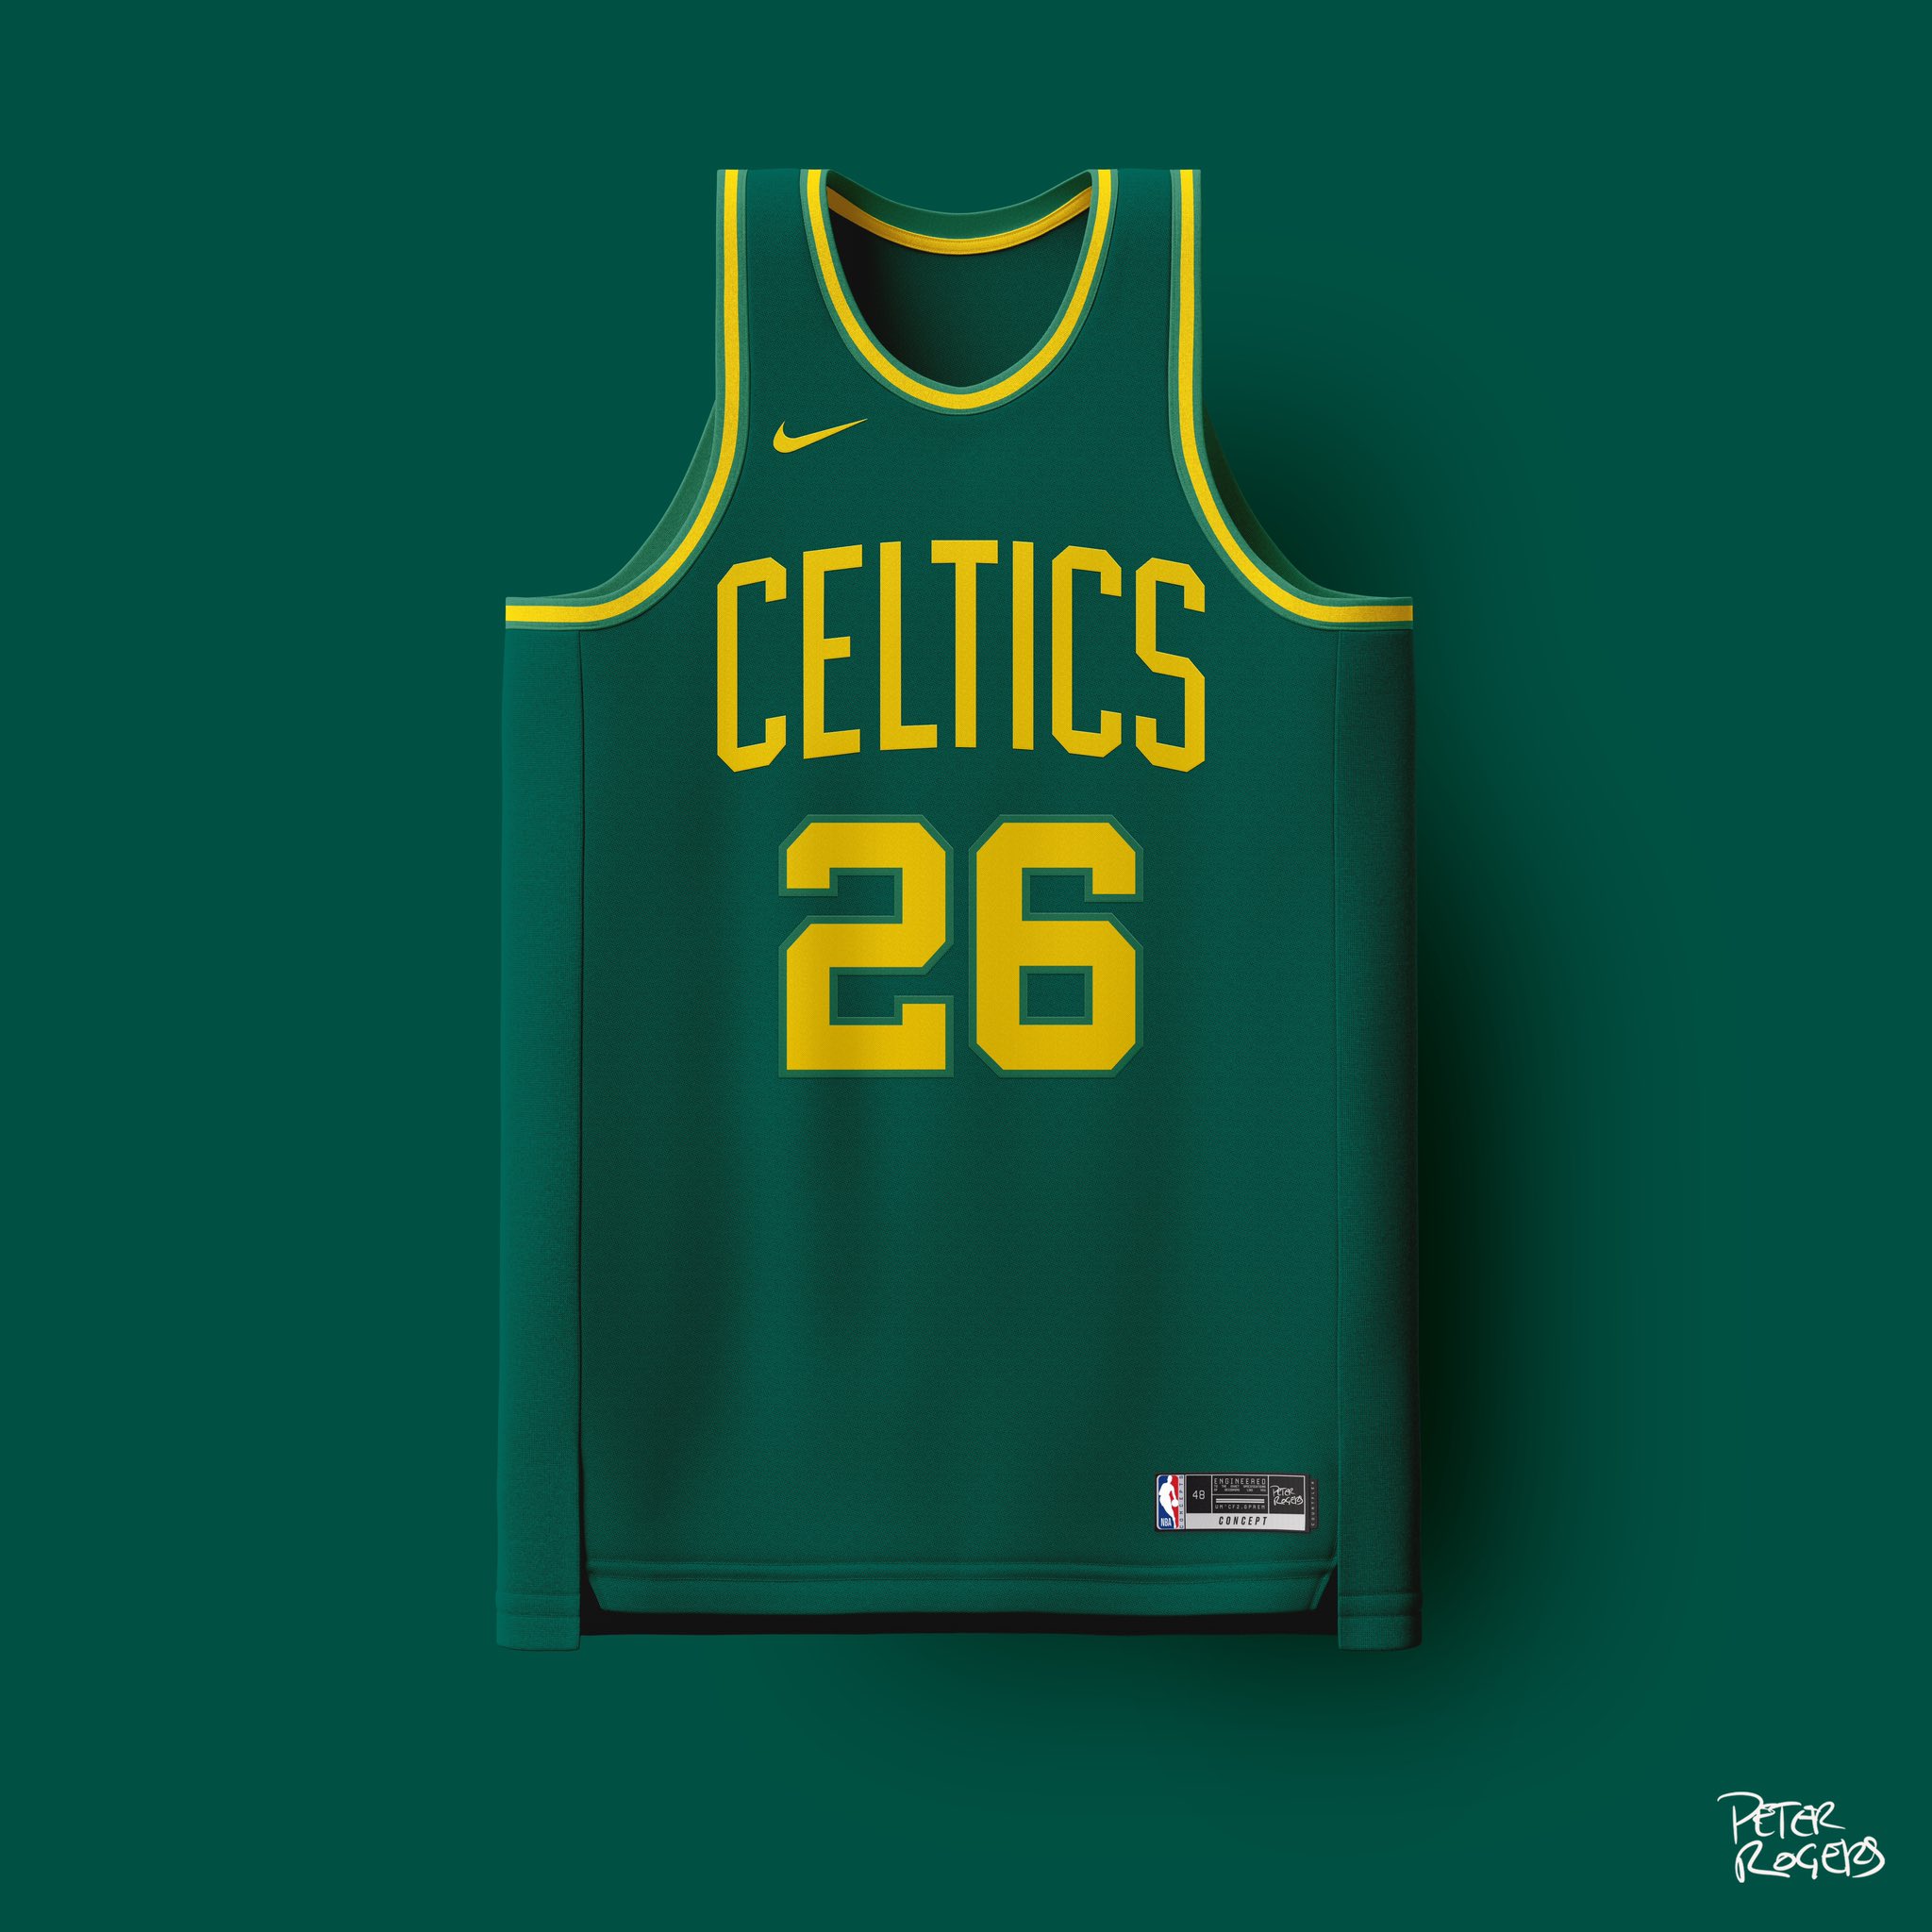 Meet Pete Rogers, the Celtics fan who designs a new jersey after